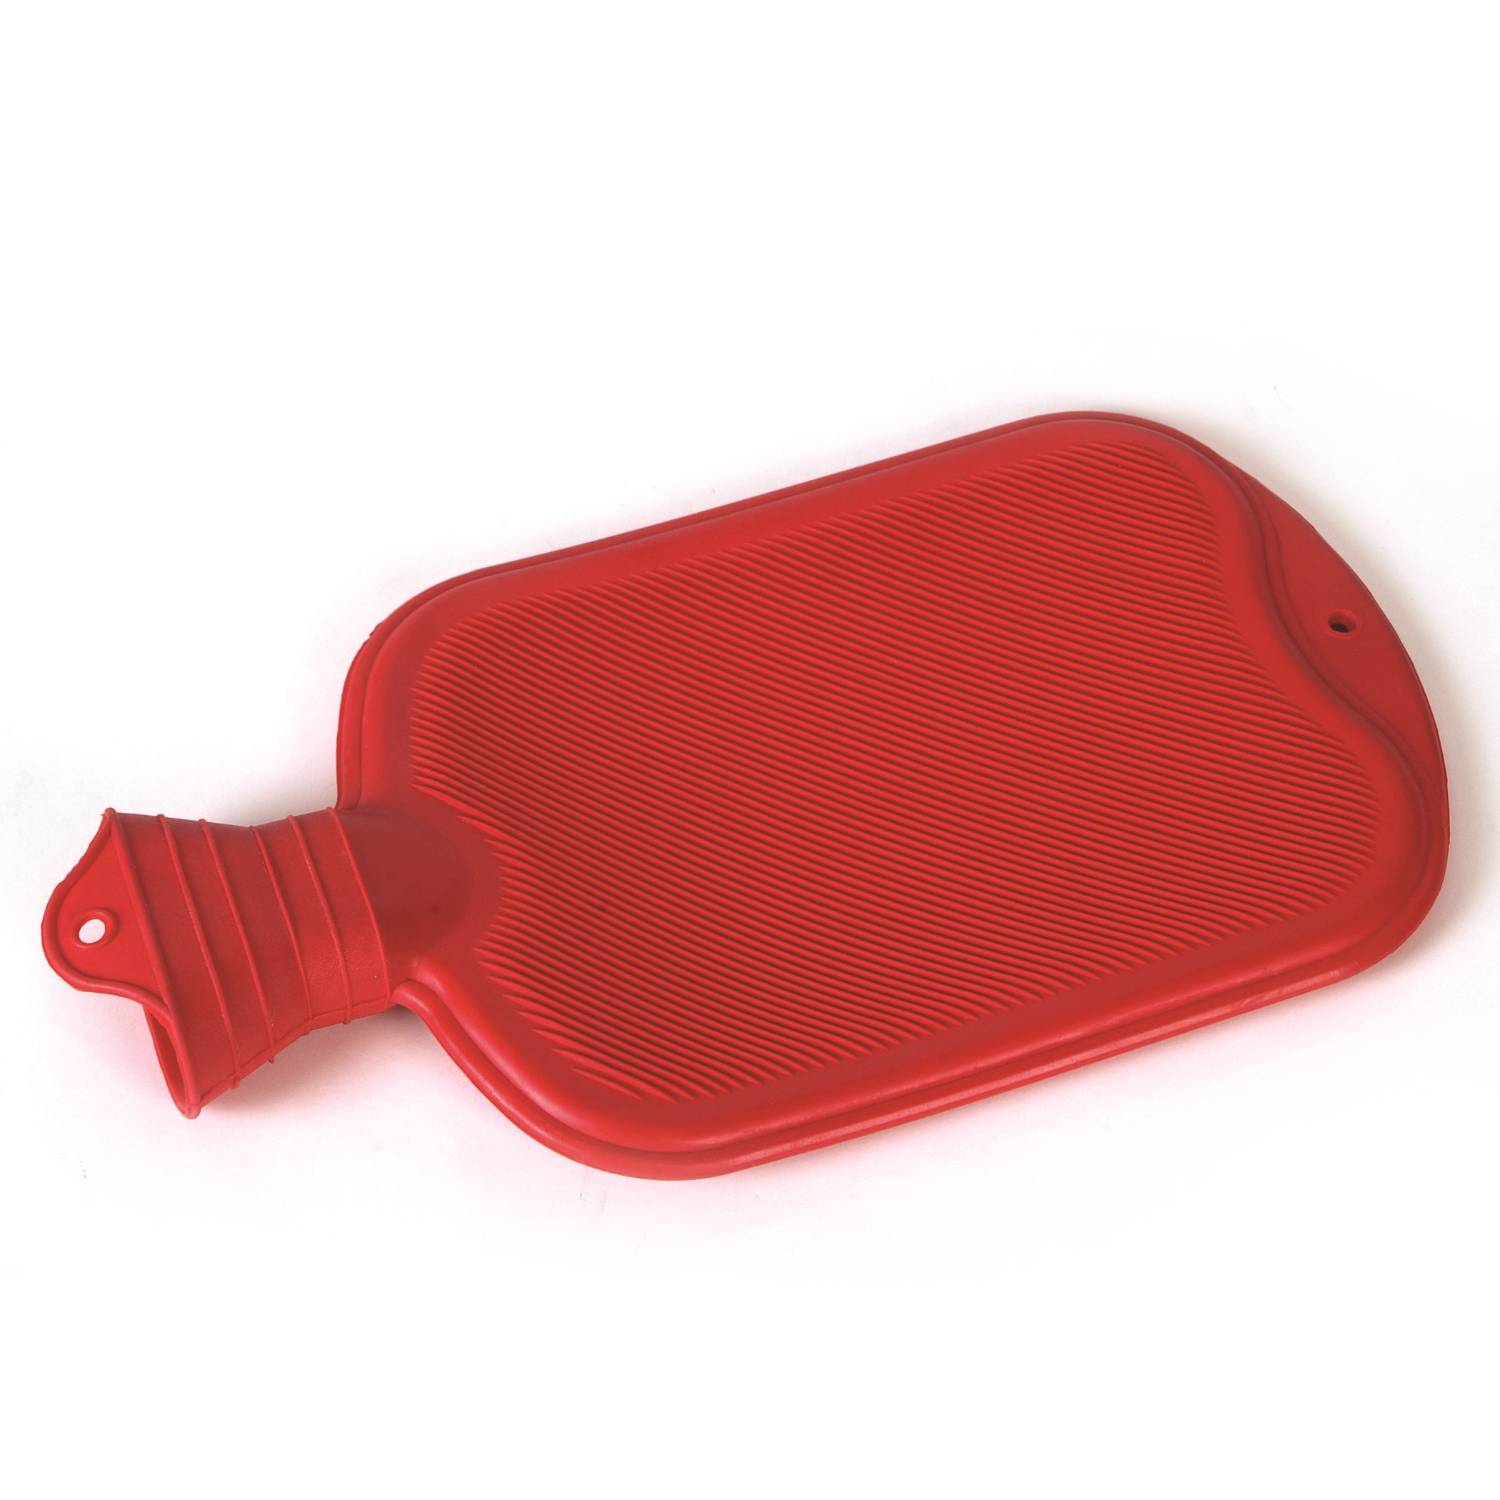 Live Well Thermoplastic Hot Water Bottle